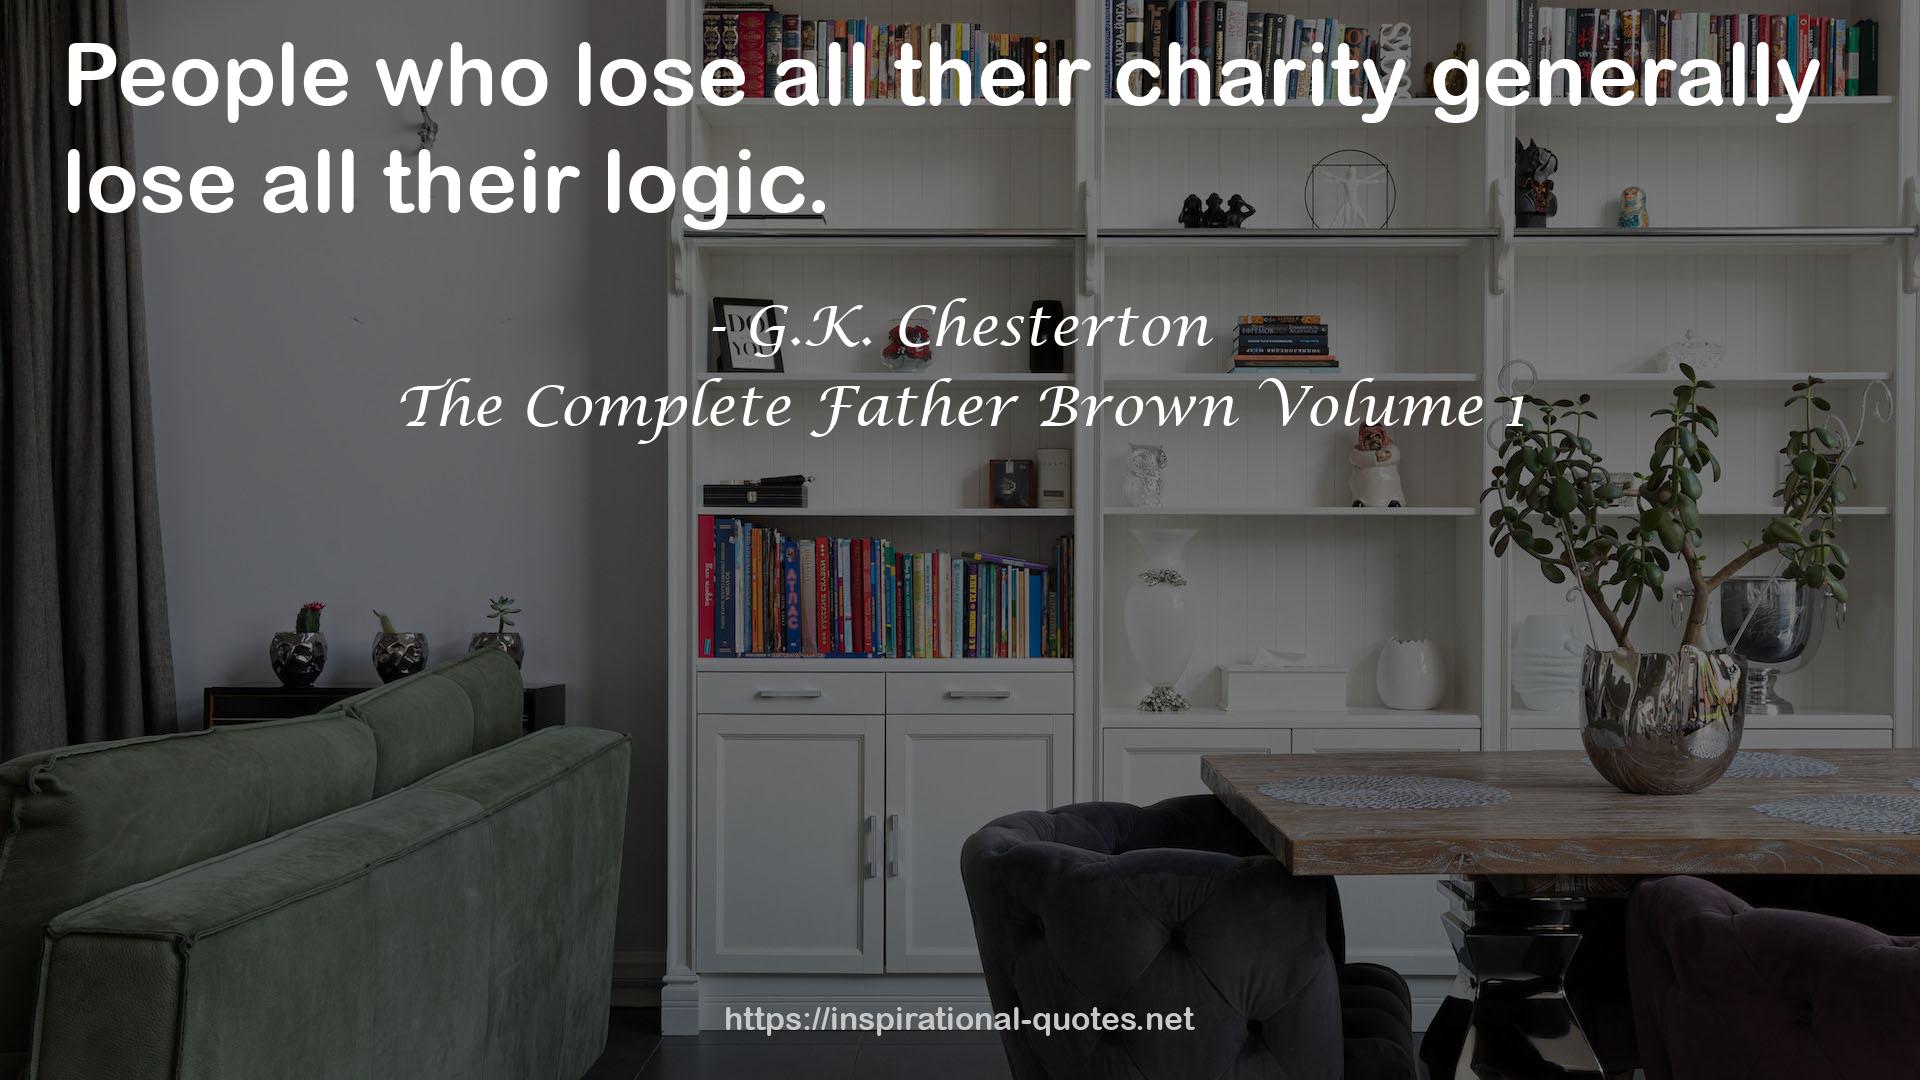 The Complete Father Brown Volume 1 QUOTES